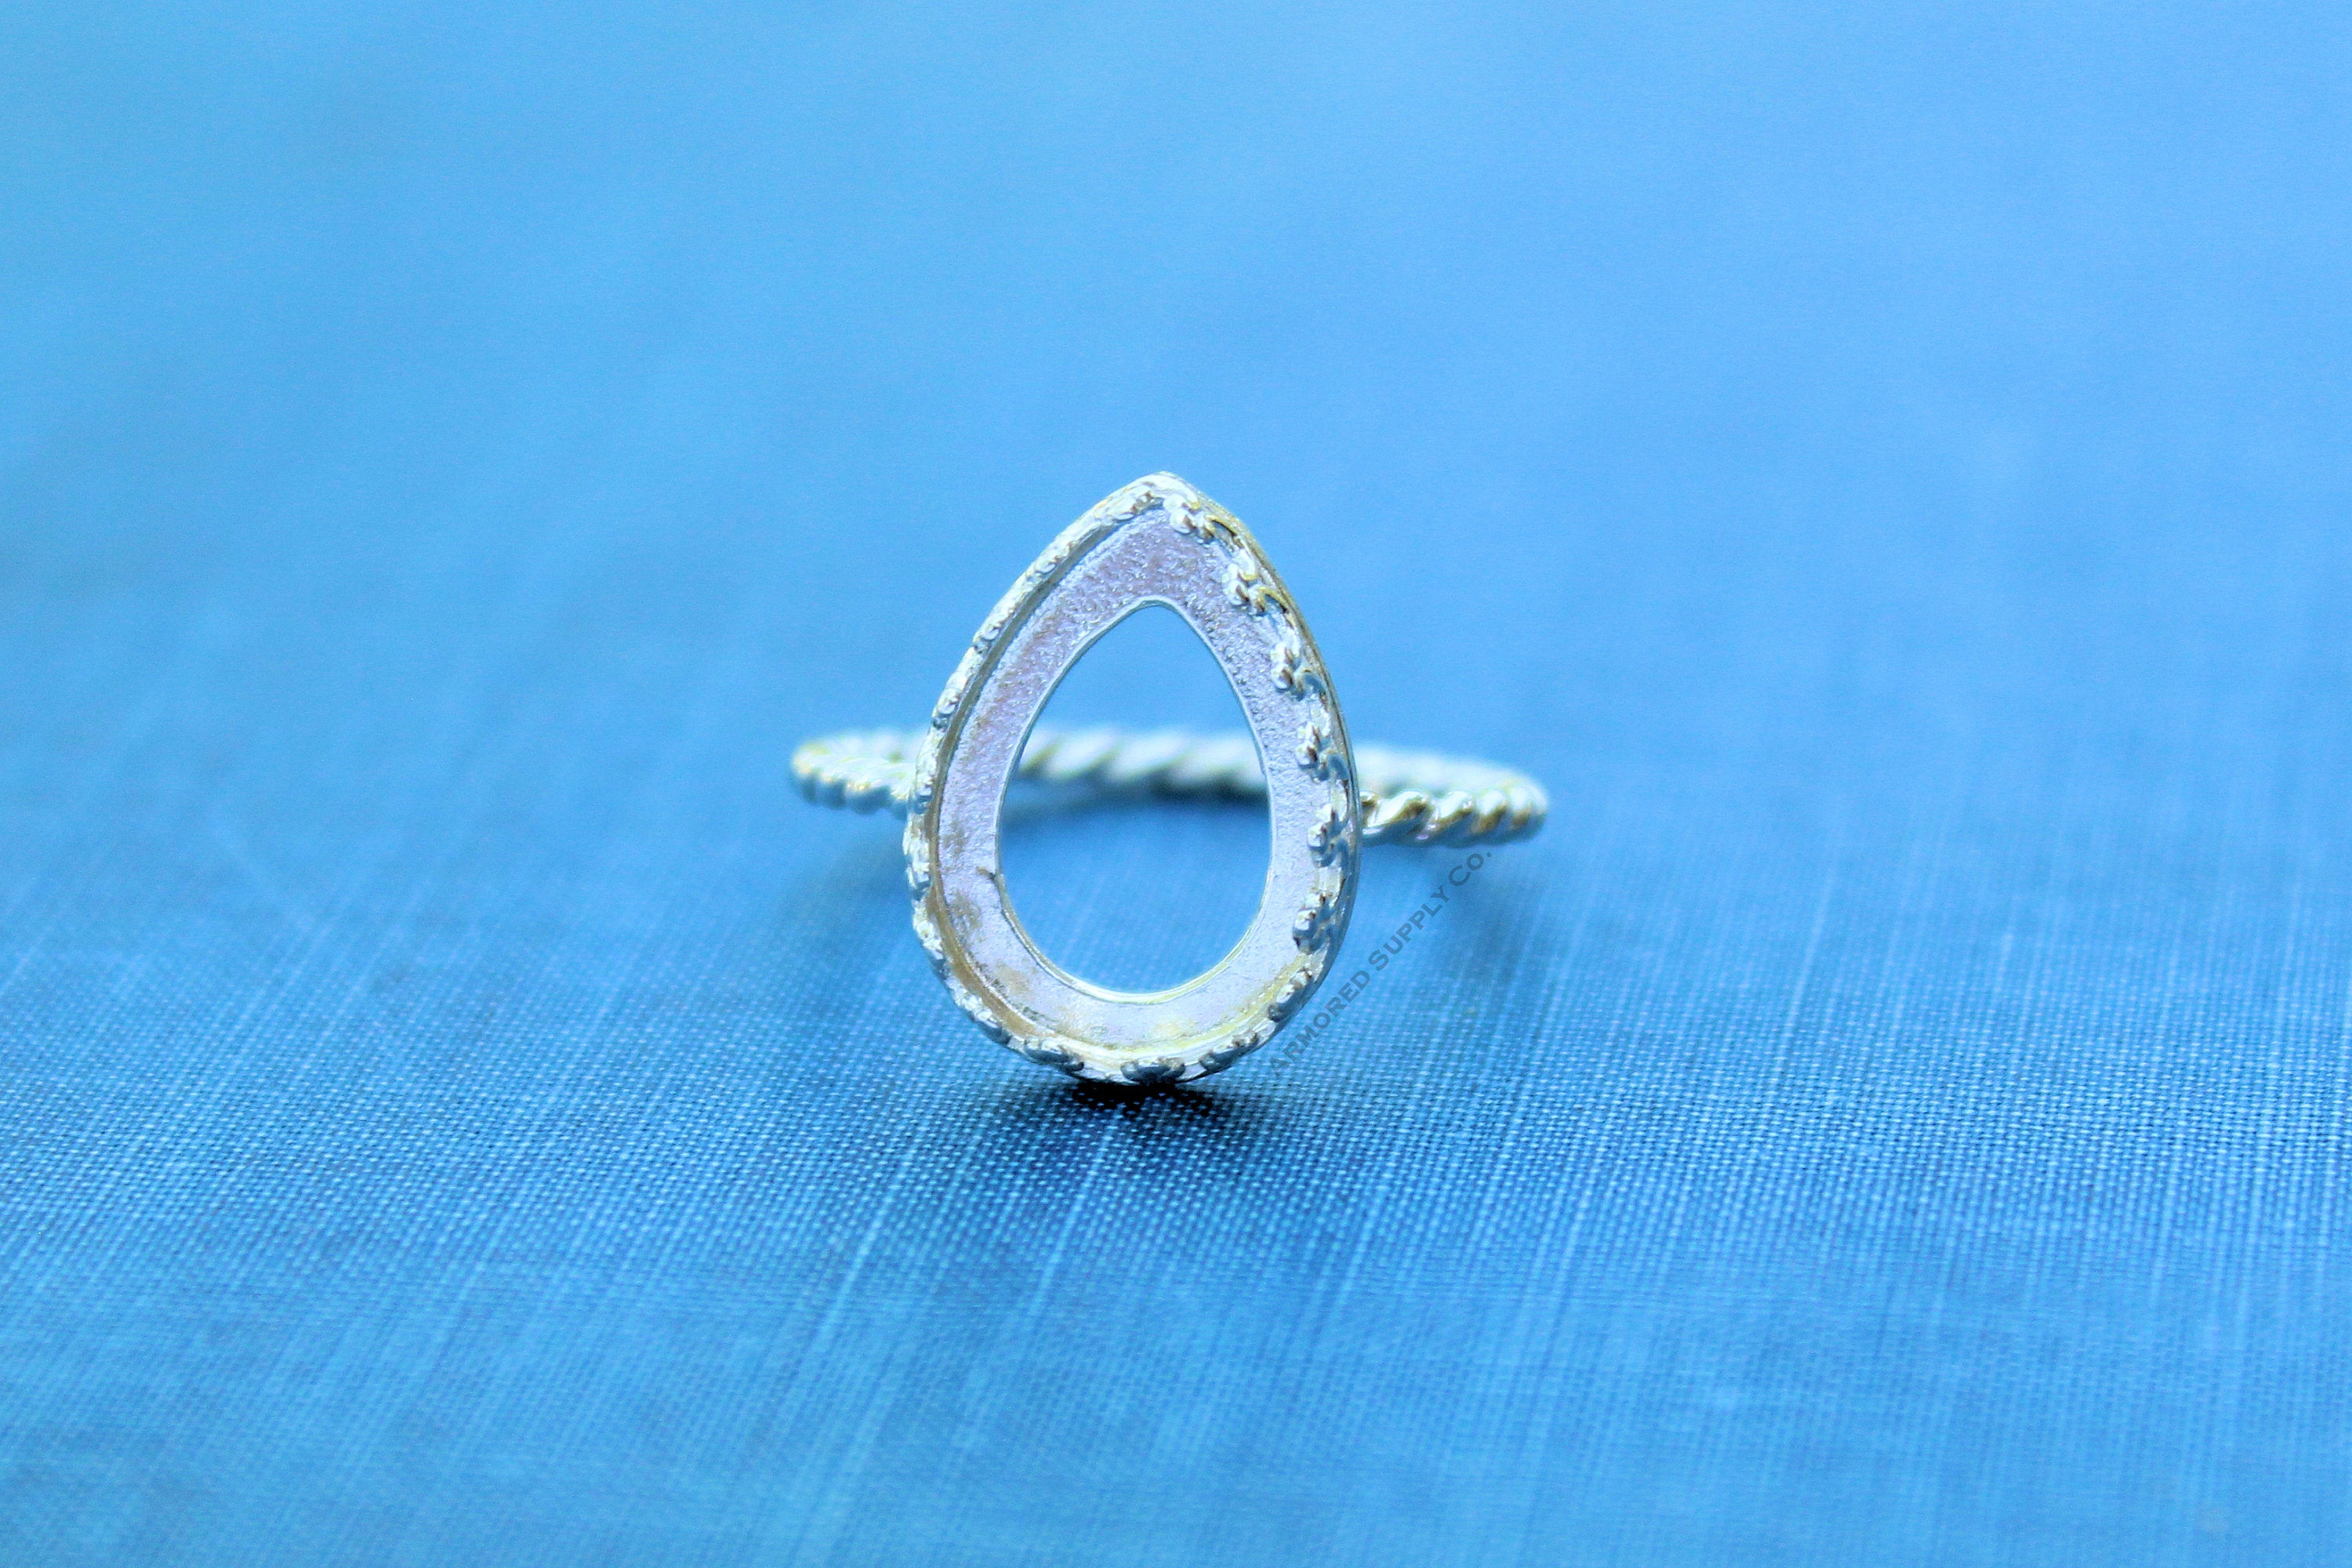 Crown Pear Tear Drop Bezel Cup Rope Ring blank, Cabochon Bezel, cab Resin, Breast Milk, DIY jewelry supplies, build ring, wholesale jewelry